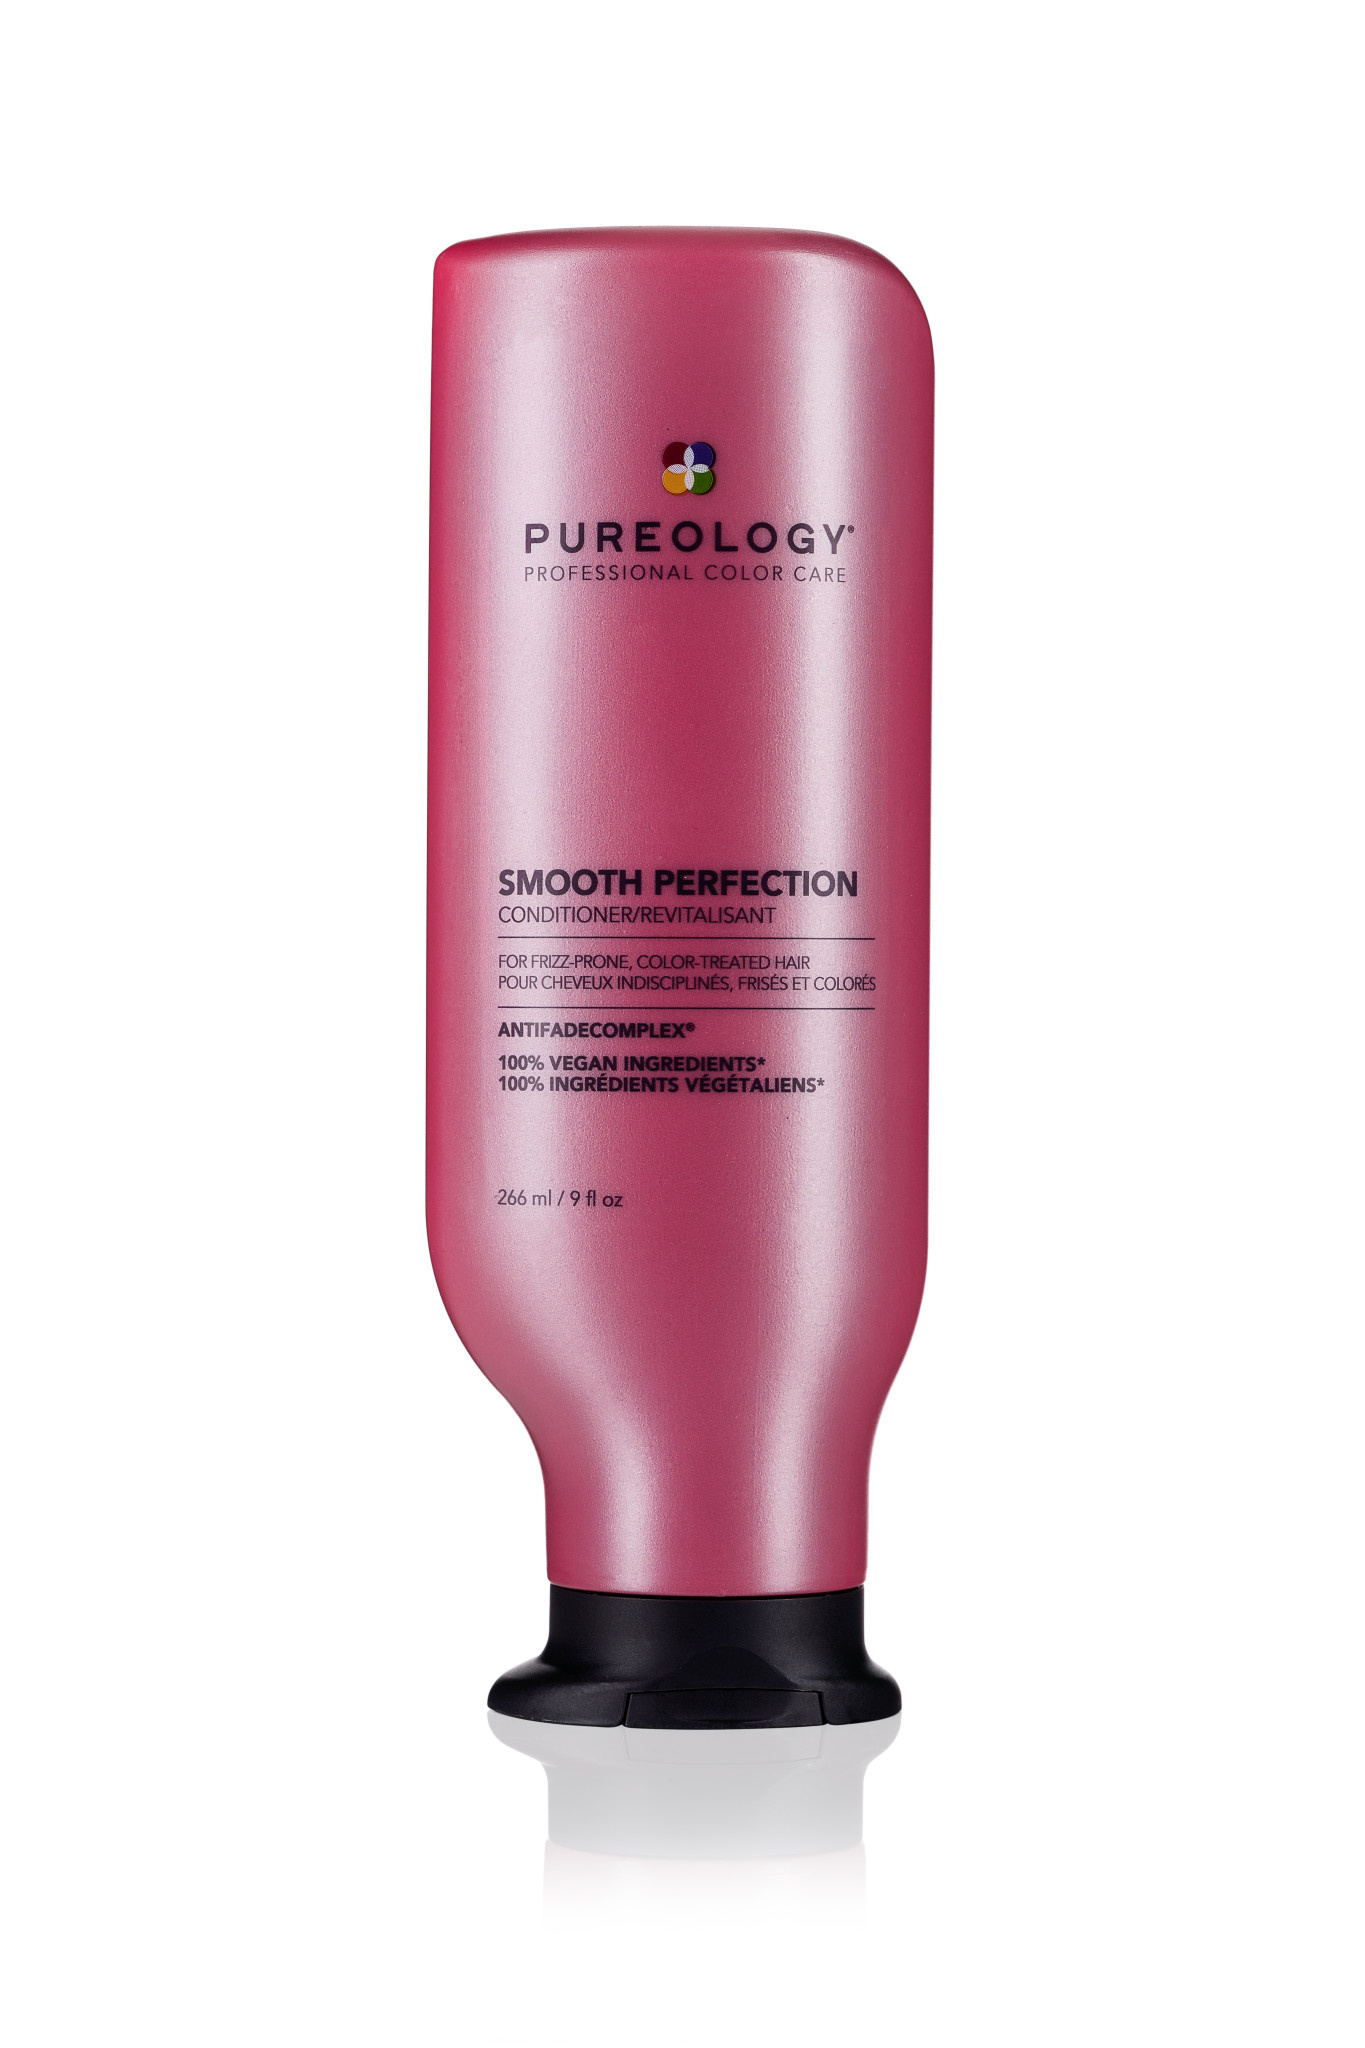 PUREOLOGY - SMOOTH PERFECTION Revitalisant